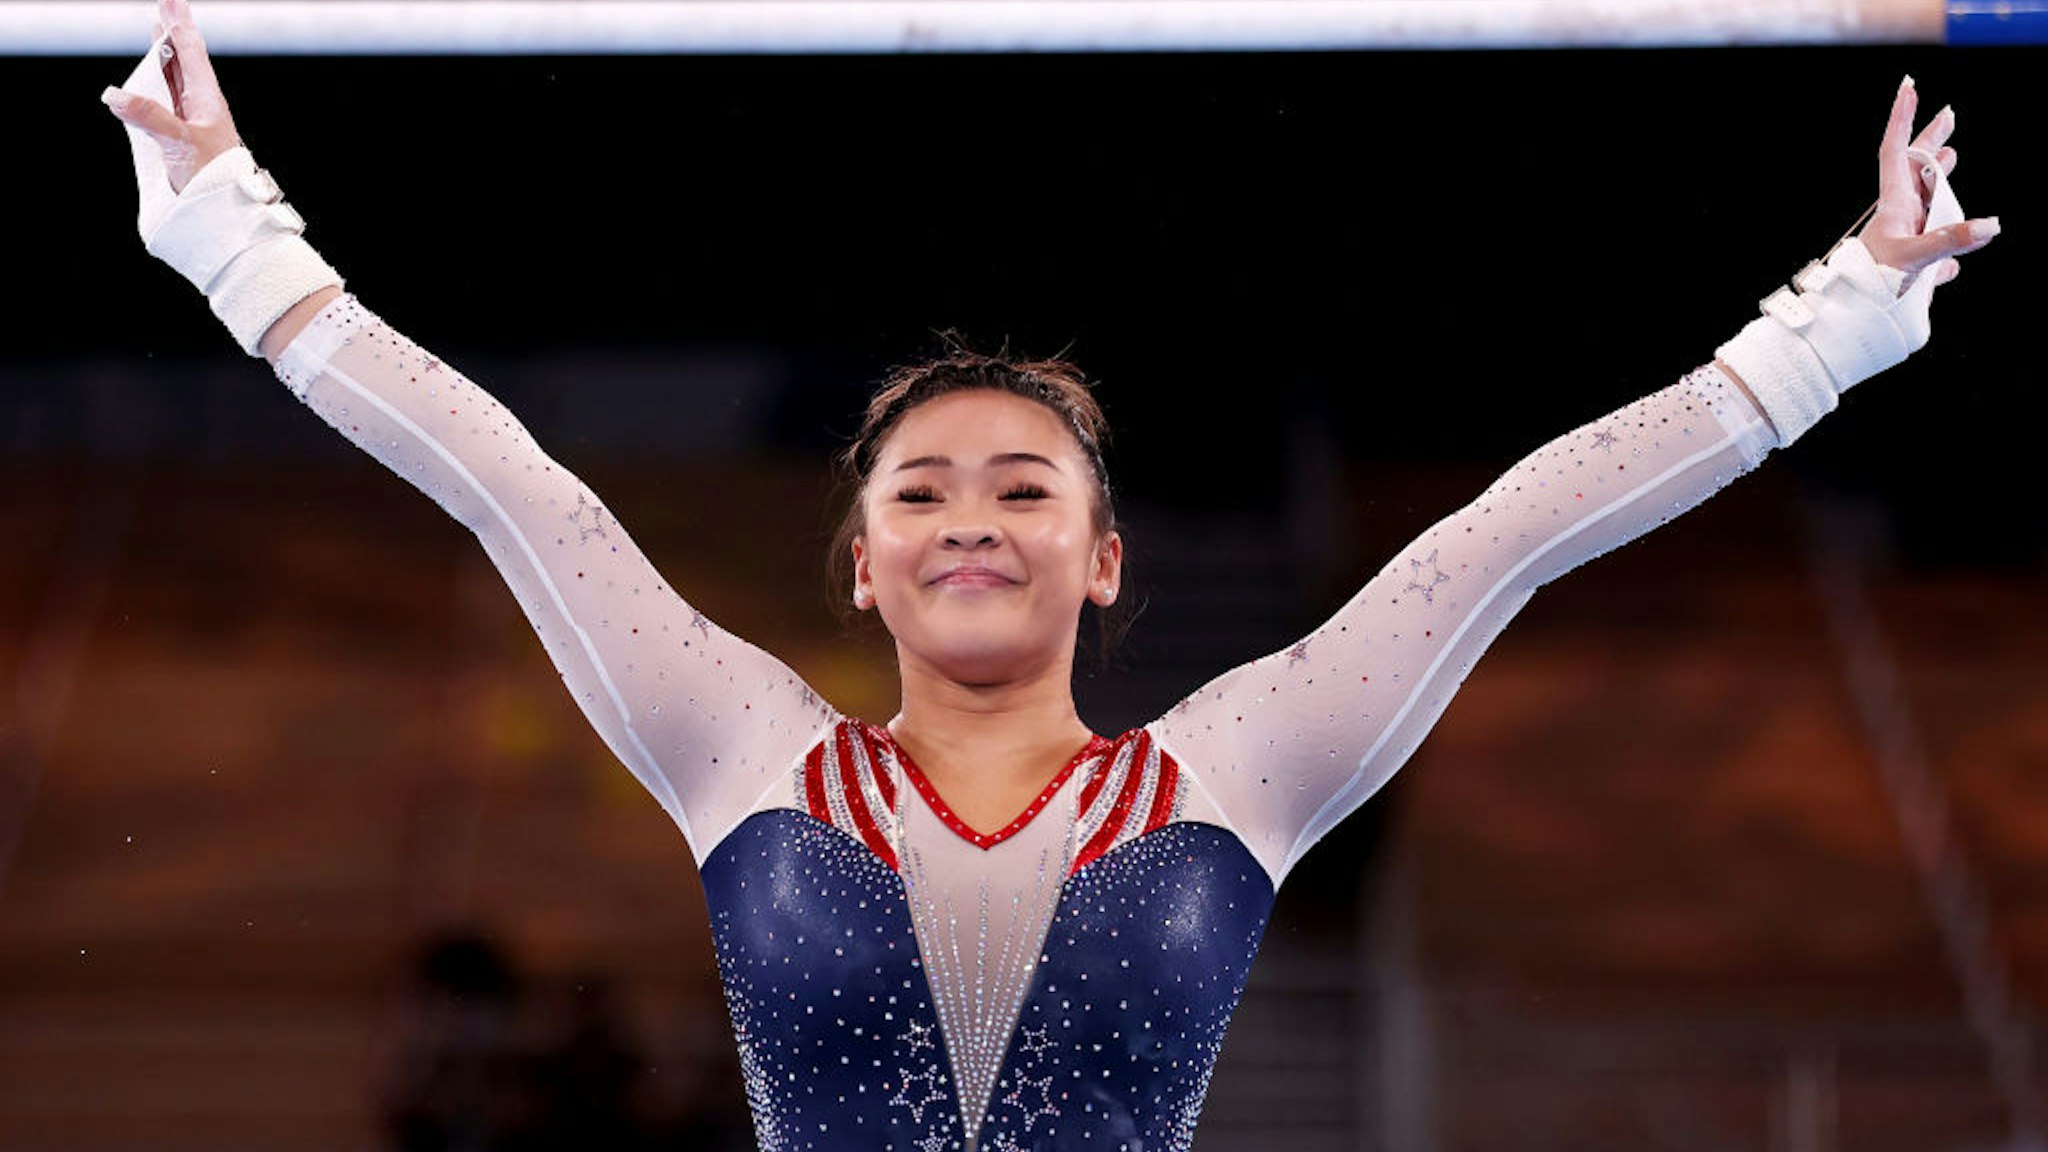 Sunisa Lee of Team United States reacts after competing on uneven bars during the Women's All-Around Final on day six of the Tokyo 2020 Olympic Games at Ariake Gymnastics Centre on July 29, 2021 in Tokyo, Japan.